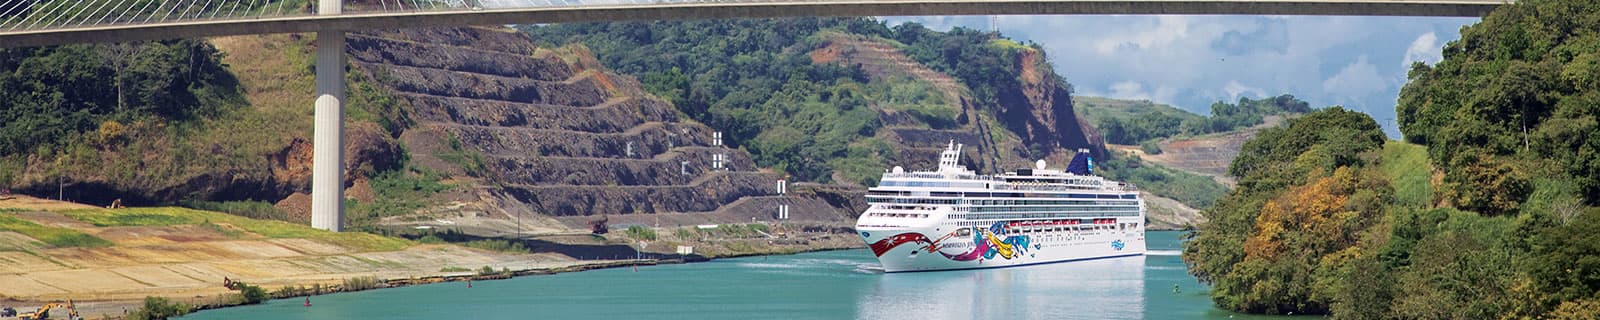 cruises from nyc to panama